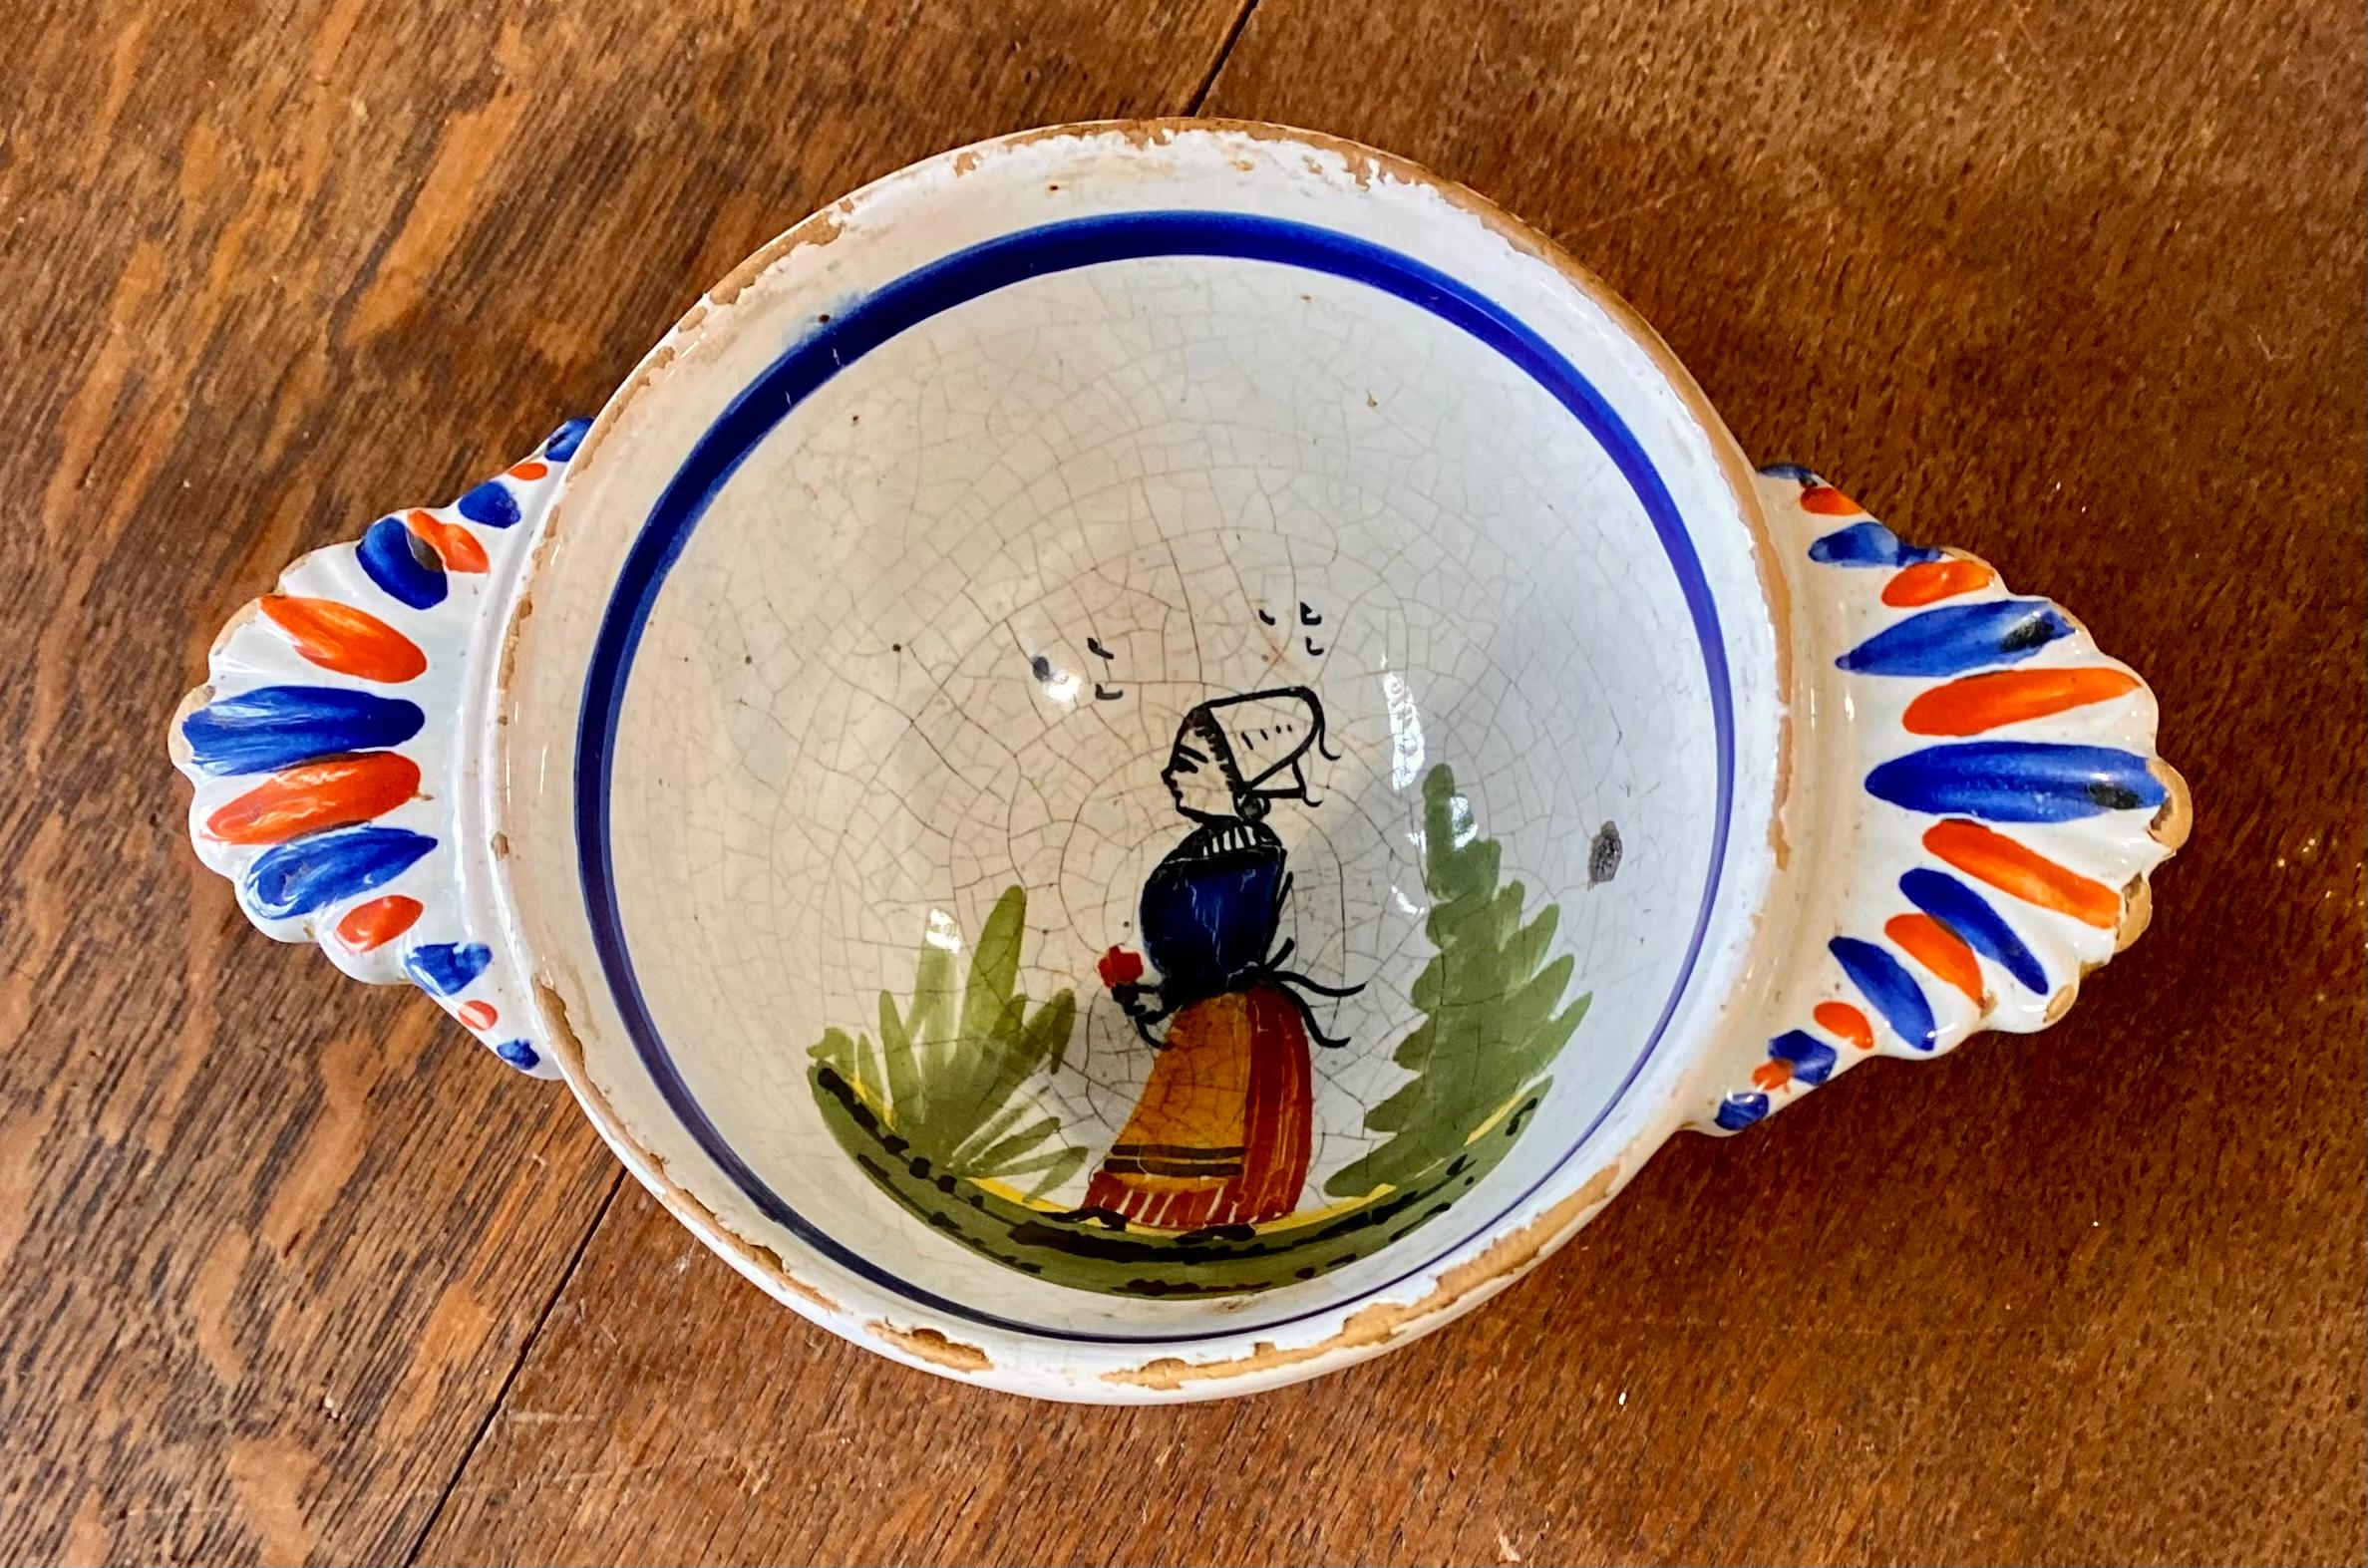 A beautiful old Quimper bowl signed HB Quimper. It is hand painted with the image of a Breton woman in traditional costume walking through a forest, featuring tree and flower motifs. This piece dates to the late 1800s. There is a slight rubbing on